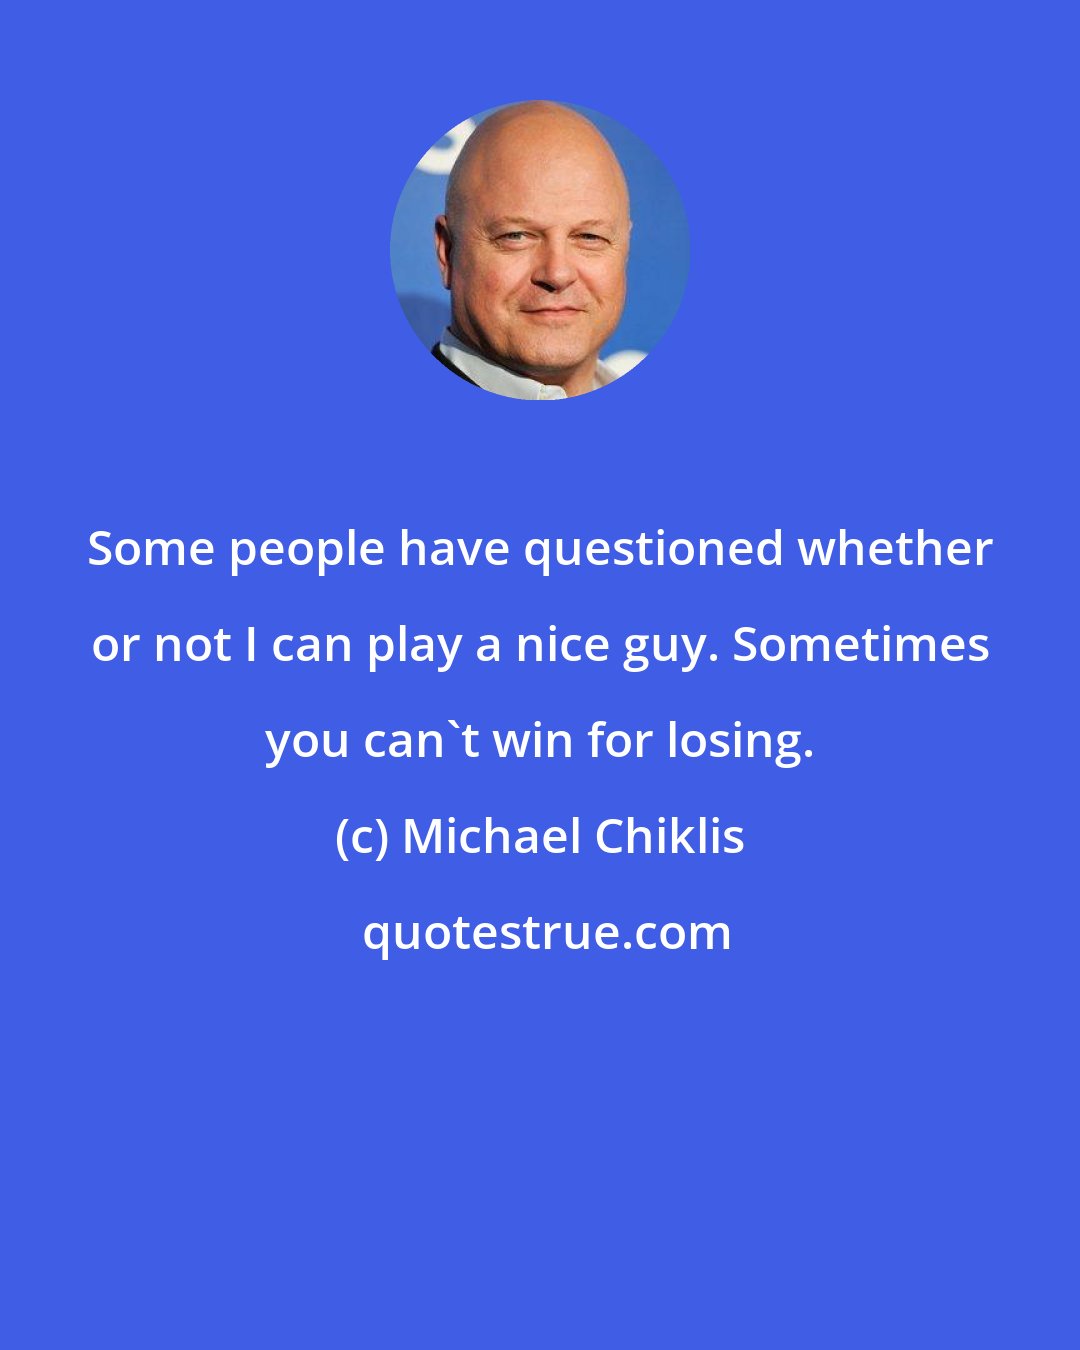 Michael Chiklis: Some people have questioned whether or not I can play a nice guy. Sometimes you can't win for losing.